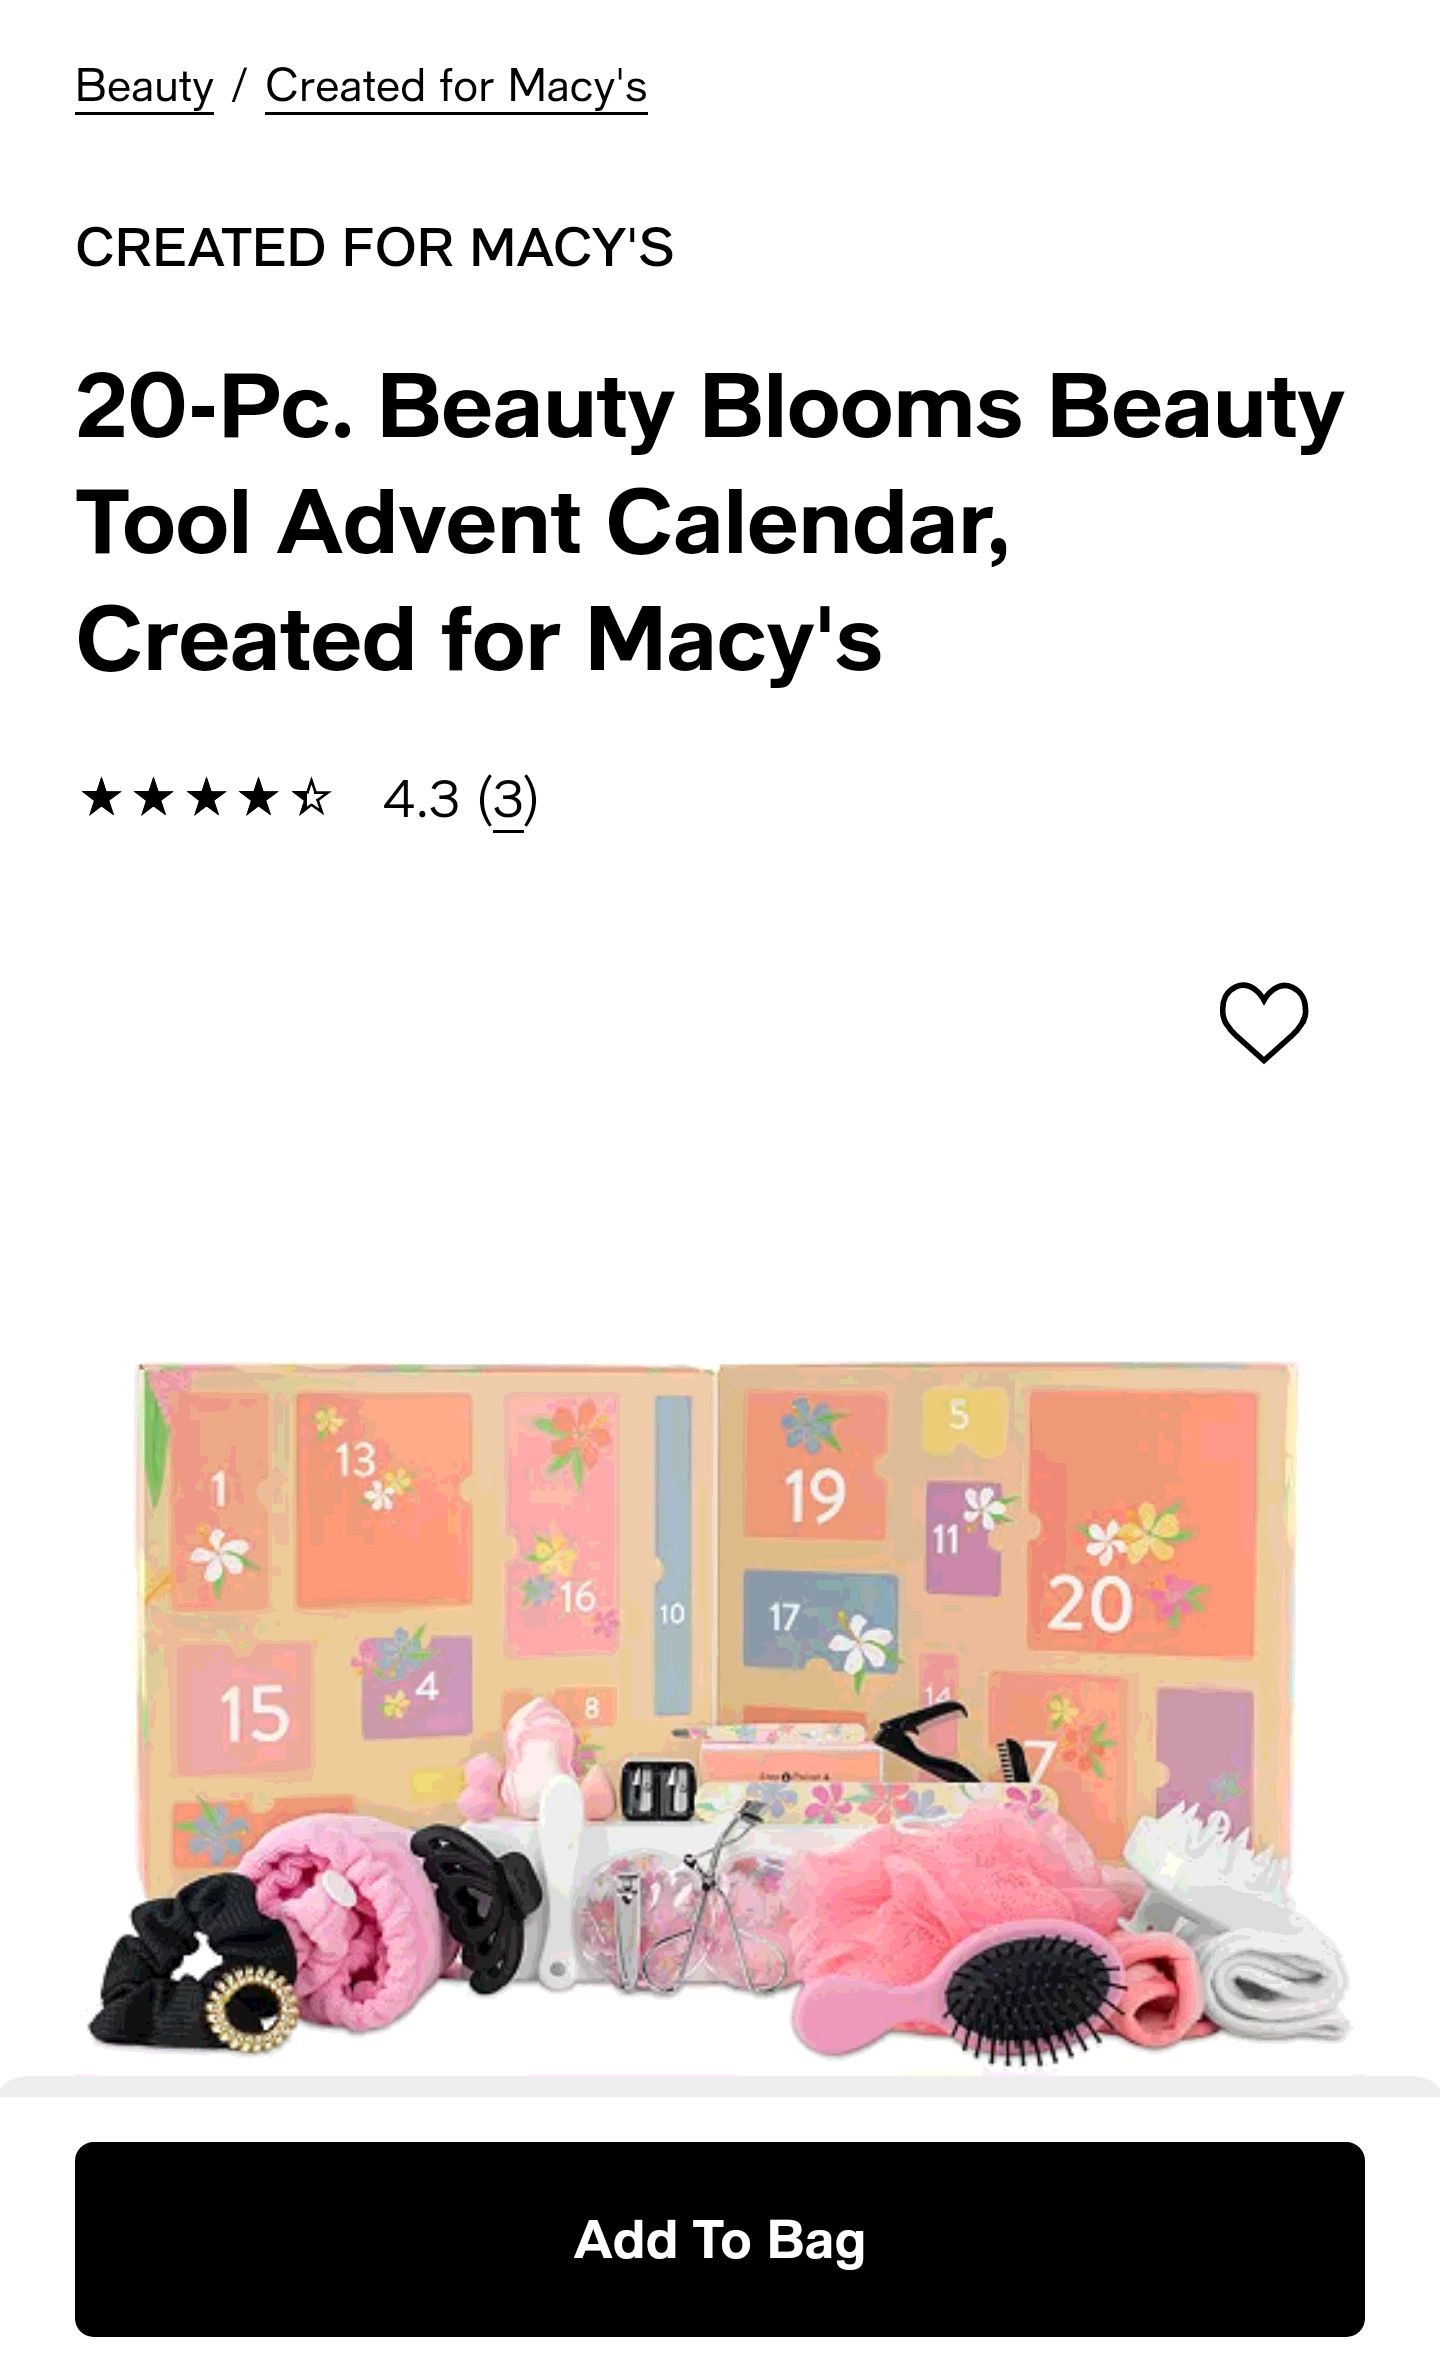 Created For Macy's 20-Pc. Beauty Blooms Beauty Tool Advent Calendar, Created for Macy's & Reviews - Created for Macy's - Beauty - Macy's